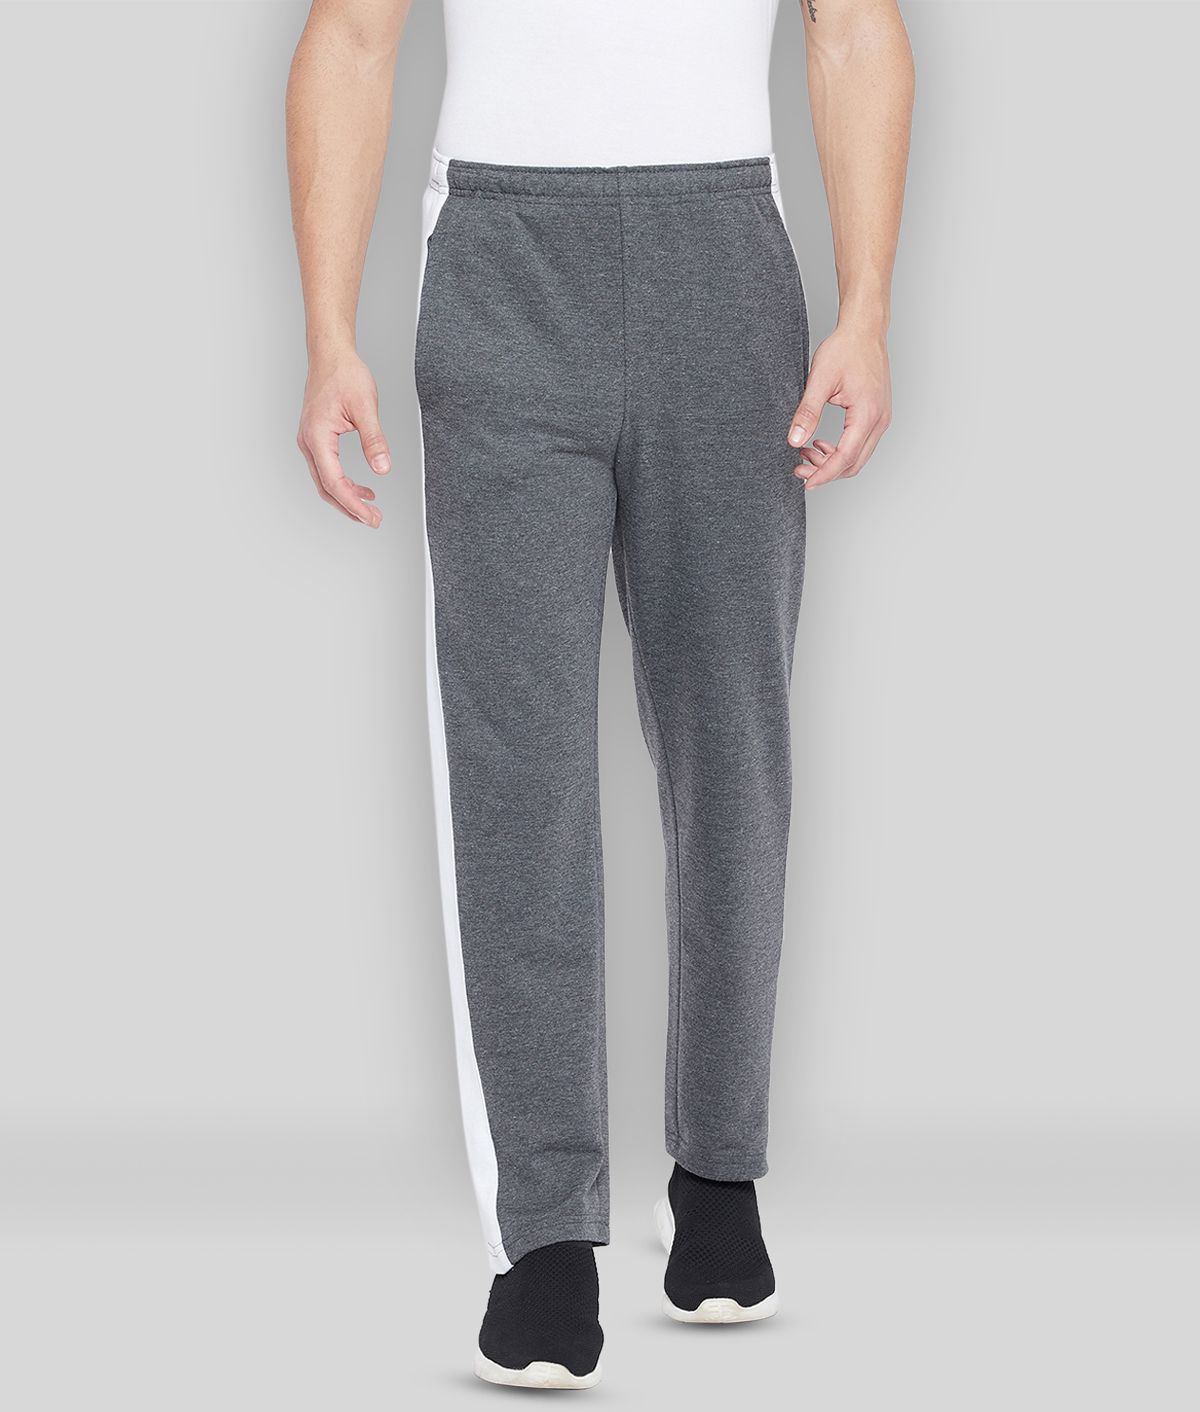 The Million Club - Charcoal Cotton Men's Trackpants ( Pack of 1 )